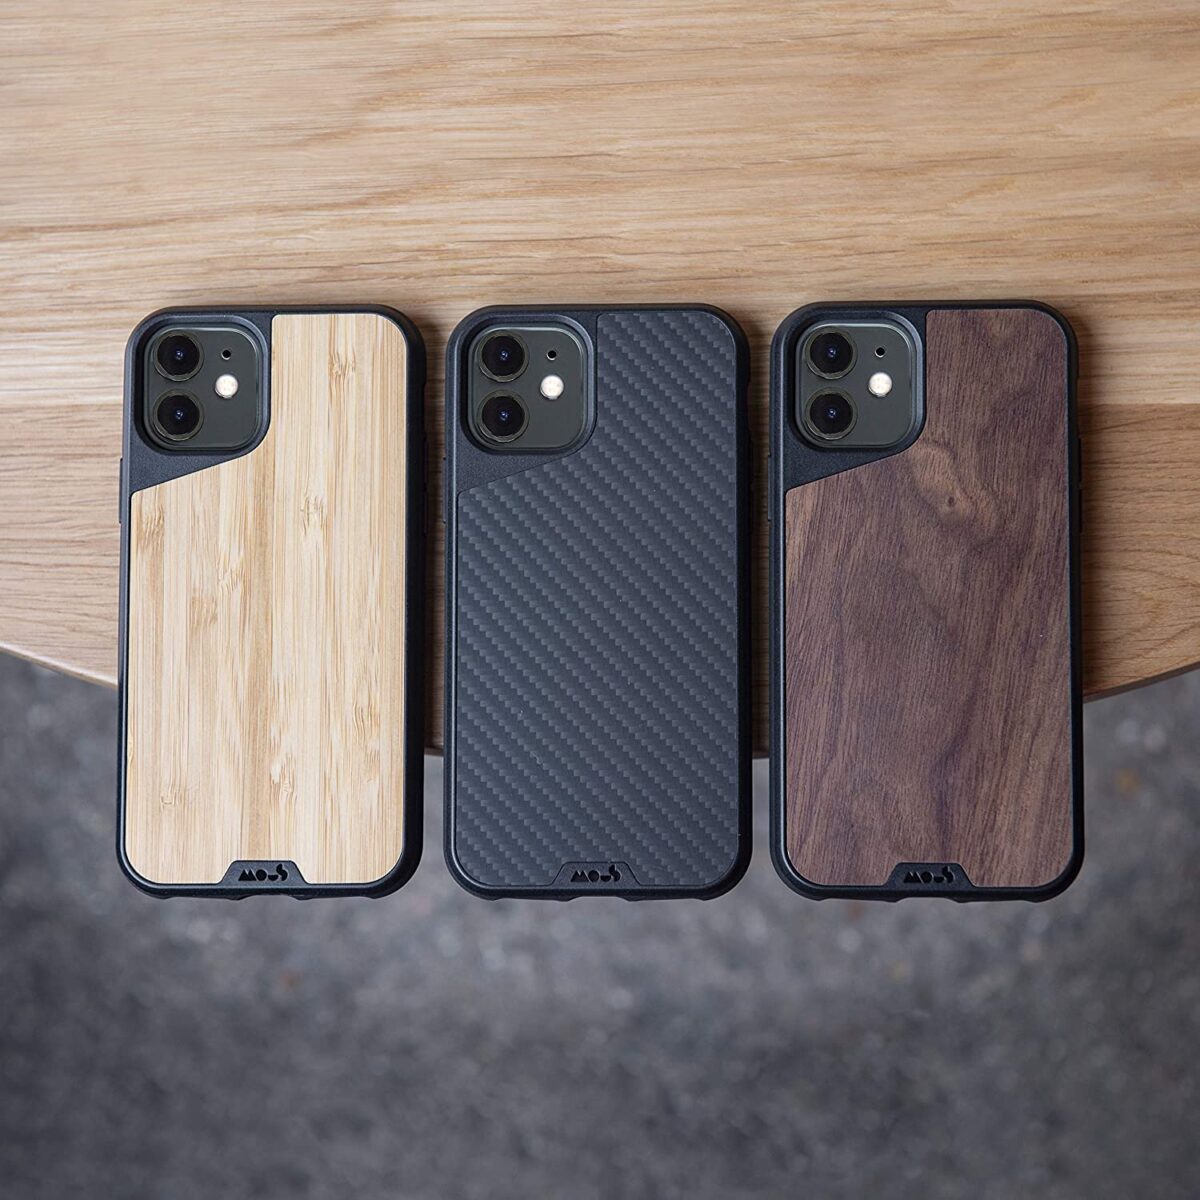 Mous - Protective Case for iPhone 11 - Limitless 3.0 - Aramid Fiber